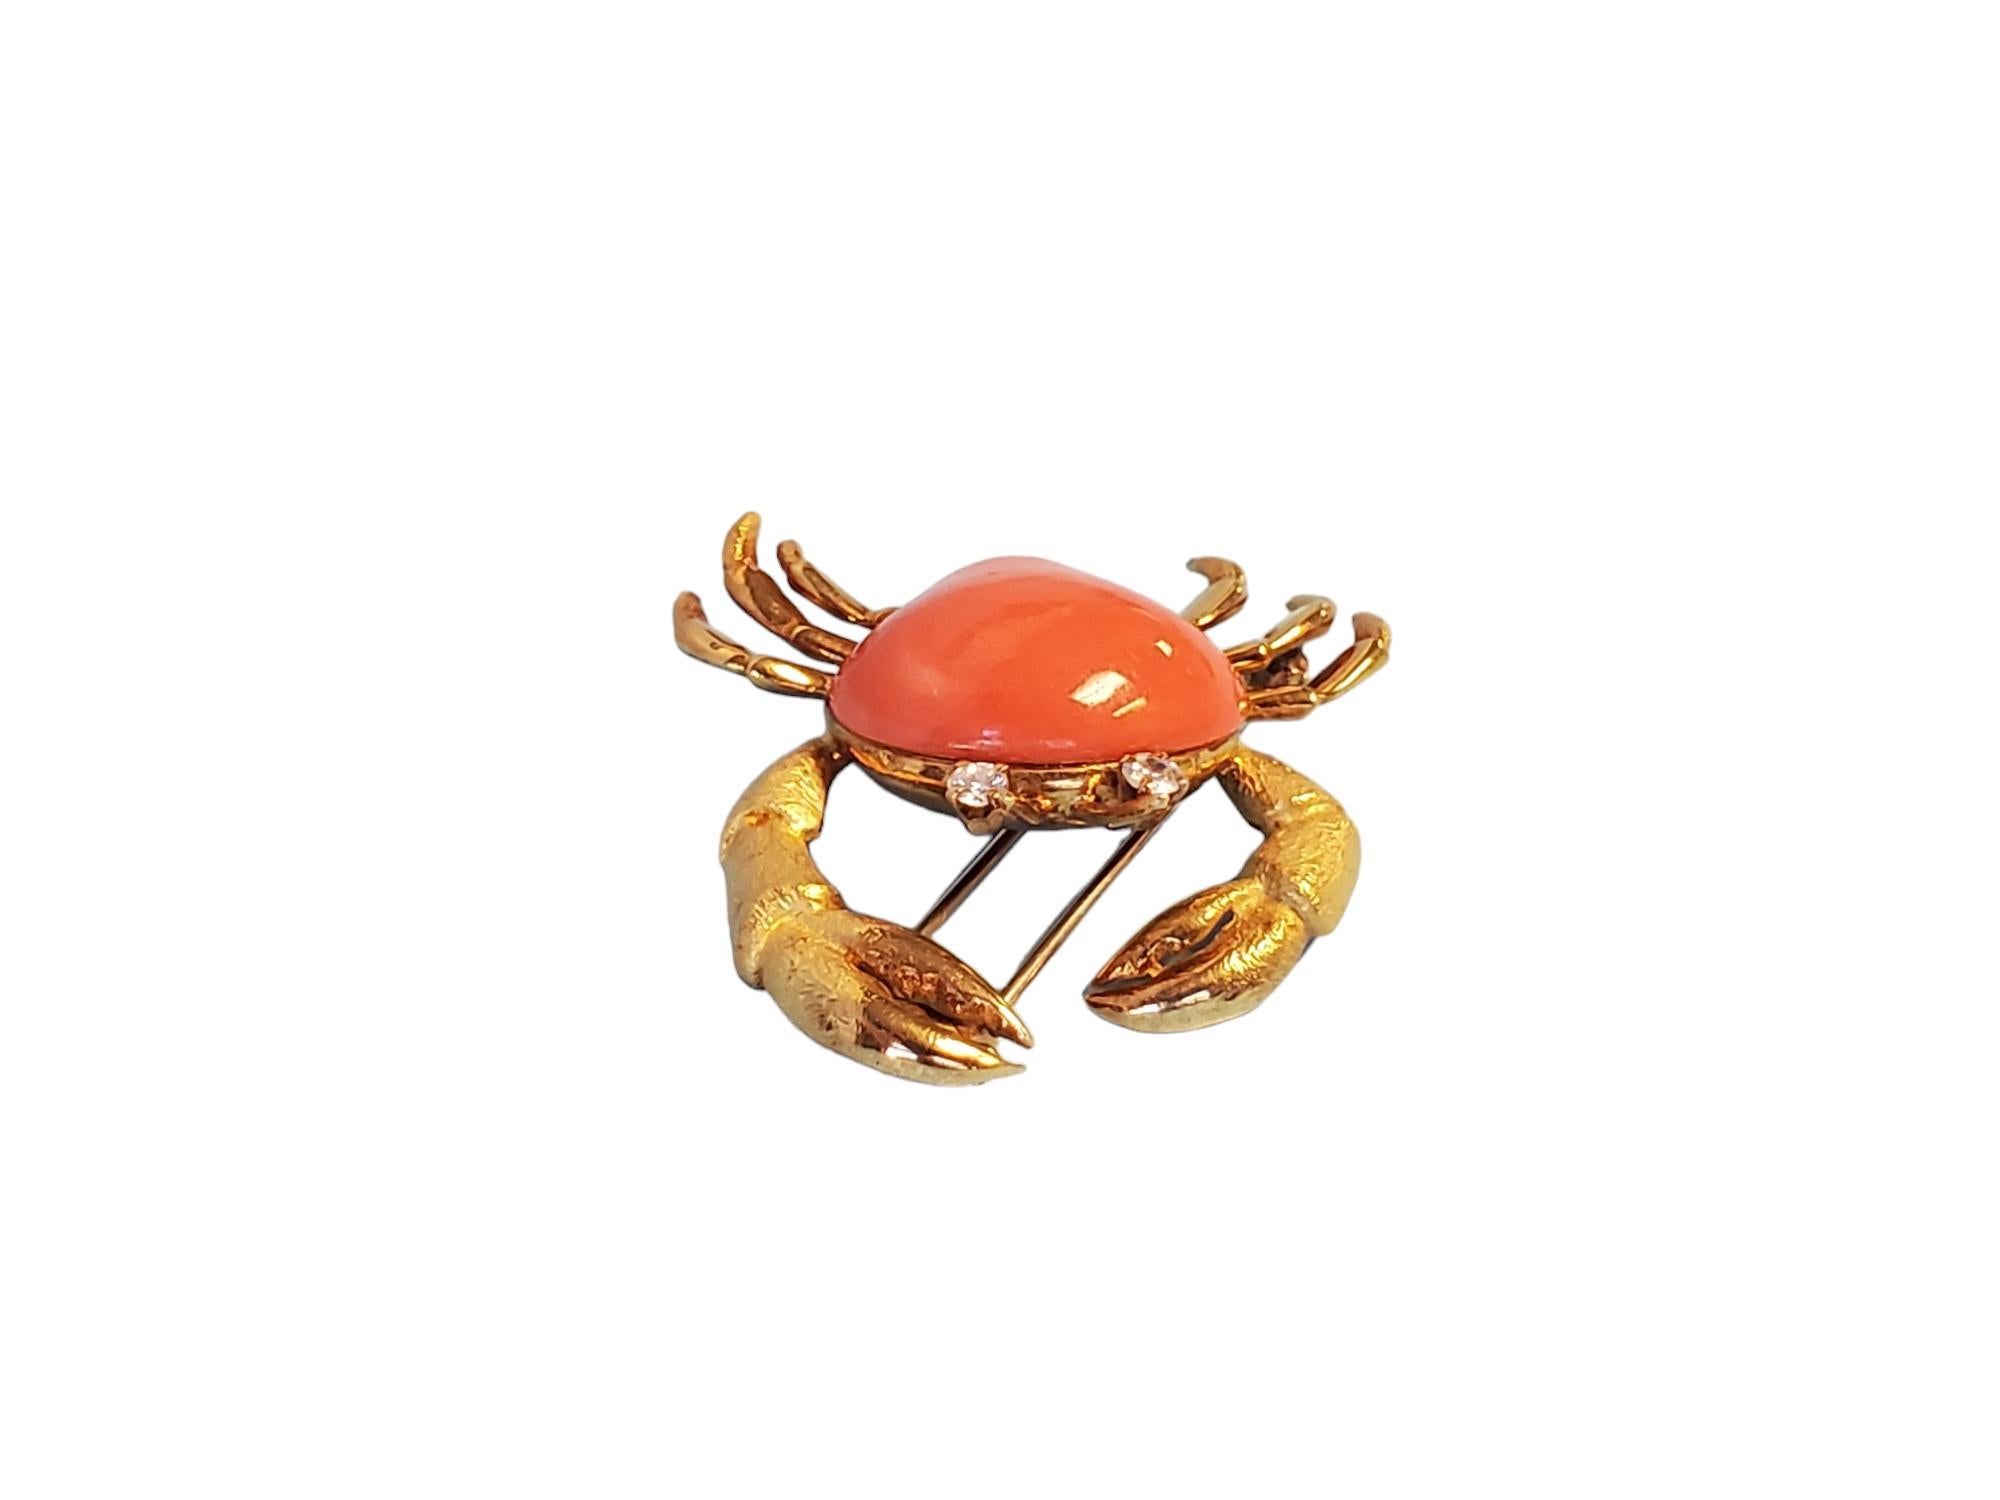 Women's Estate Vintage Crab Brooch Pin 18k Yellow Gold Angel Skin Coral Body VS Diamonds For Sale